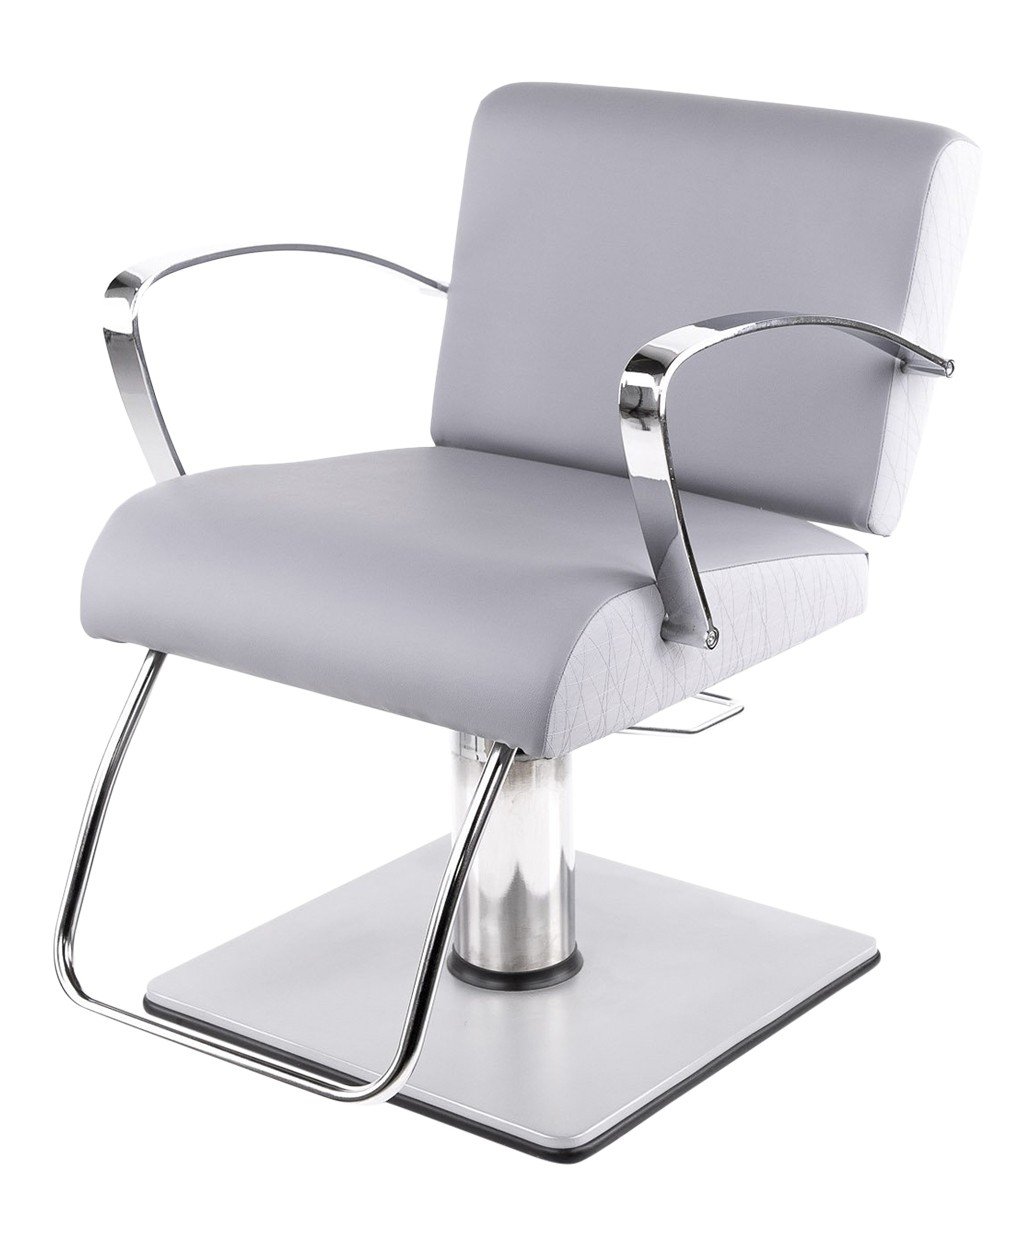 Collins 3400 Sorrento Styling Chair